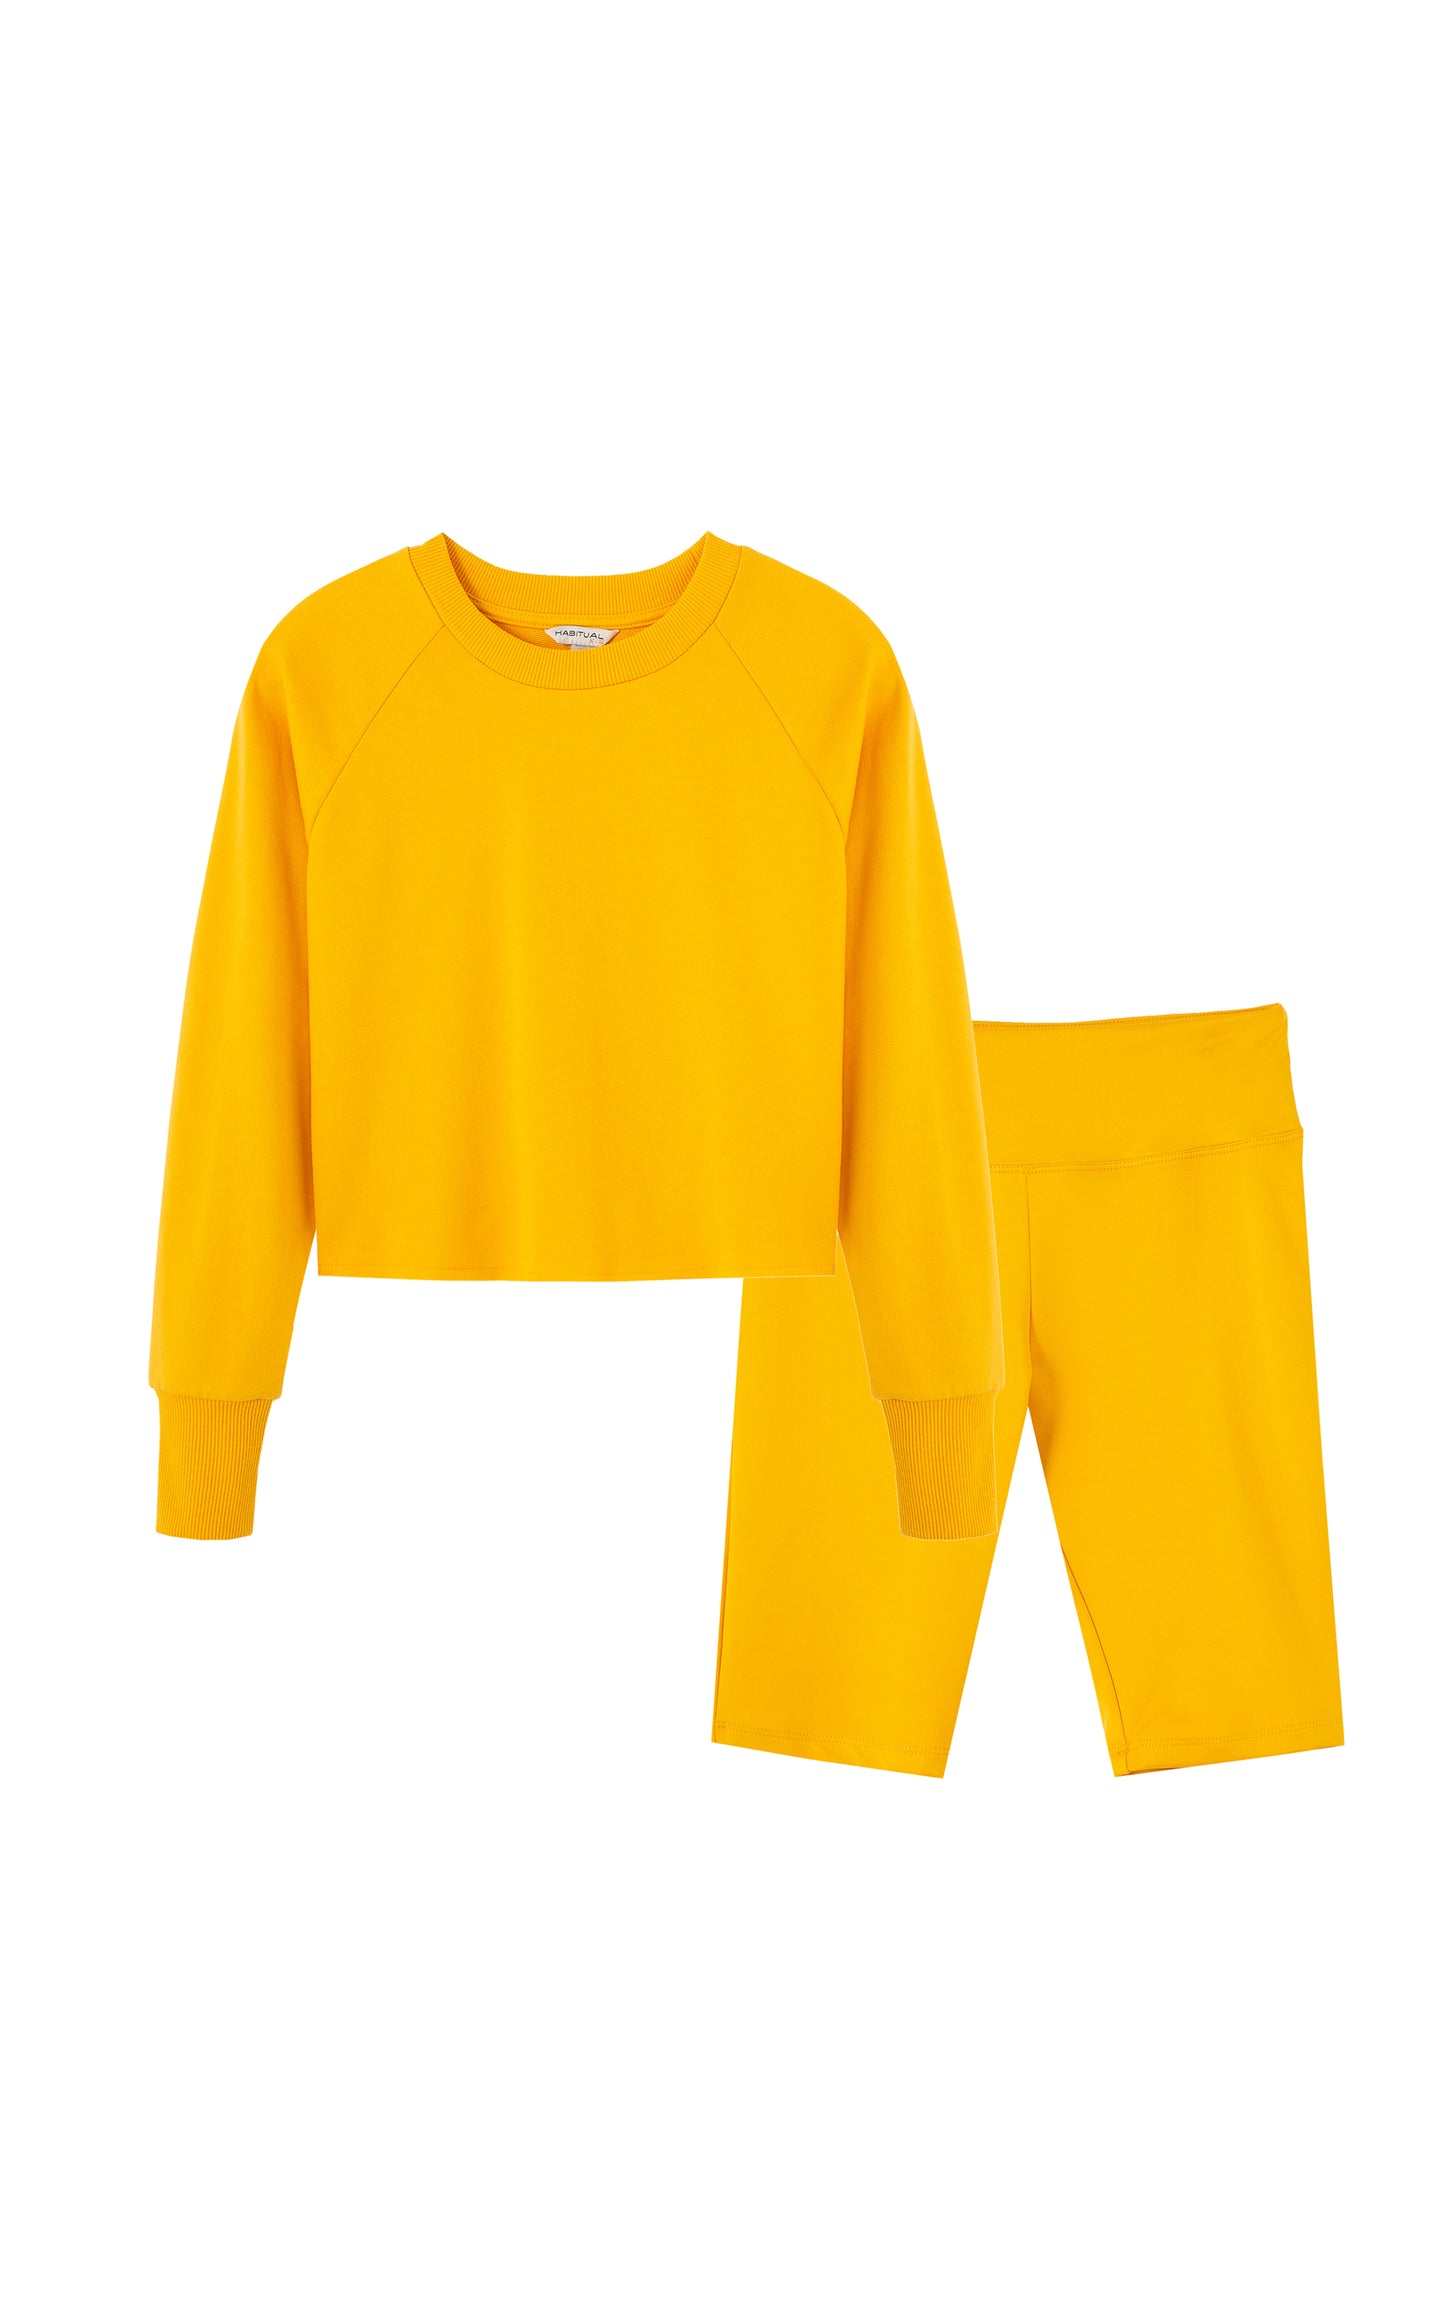 Yellow long-sleeve, crewneck top with matching shorts.